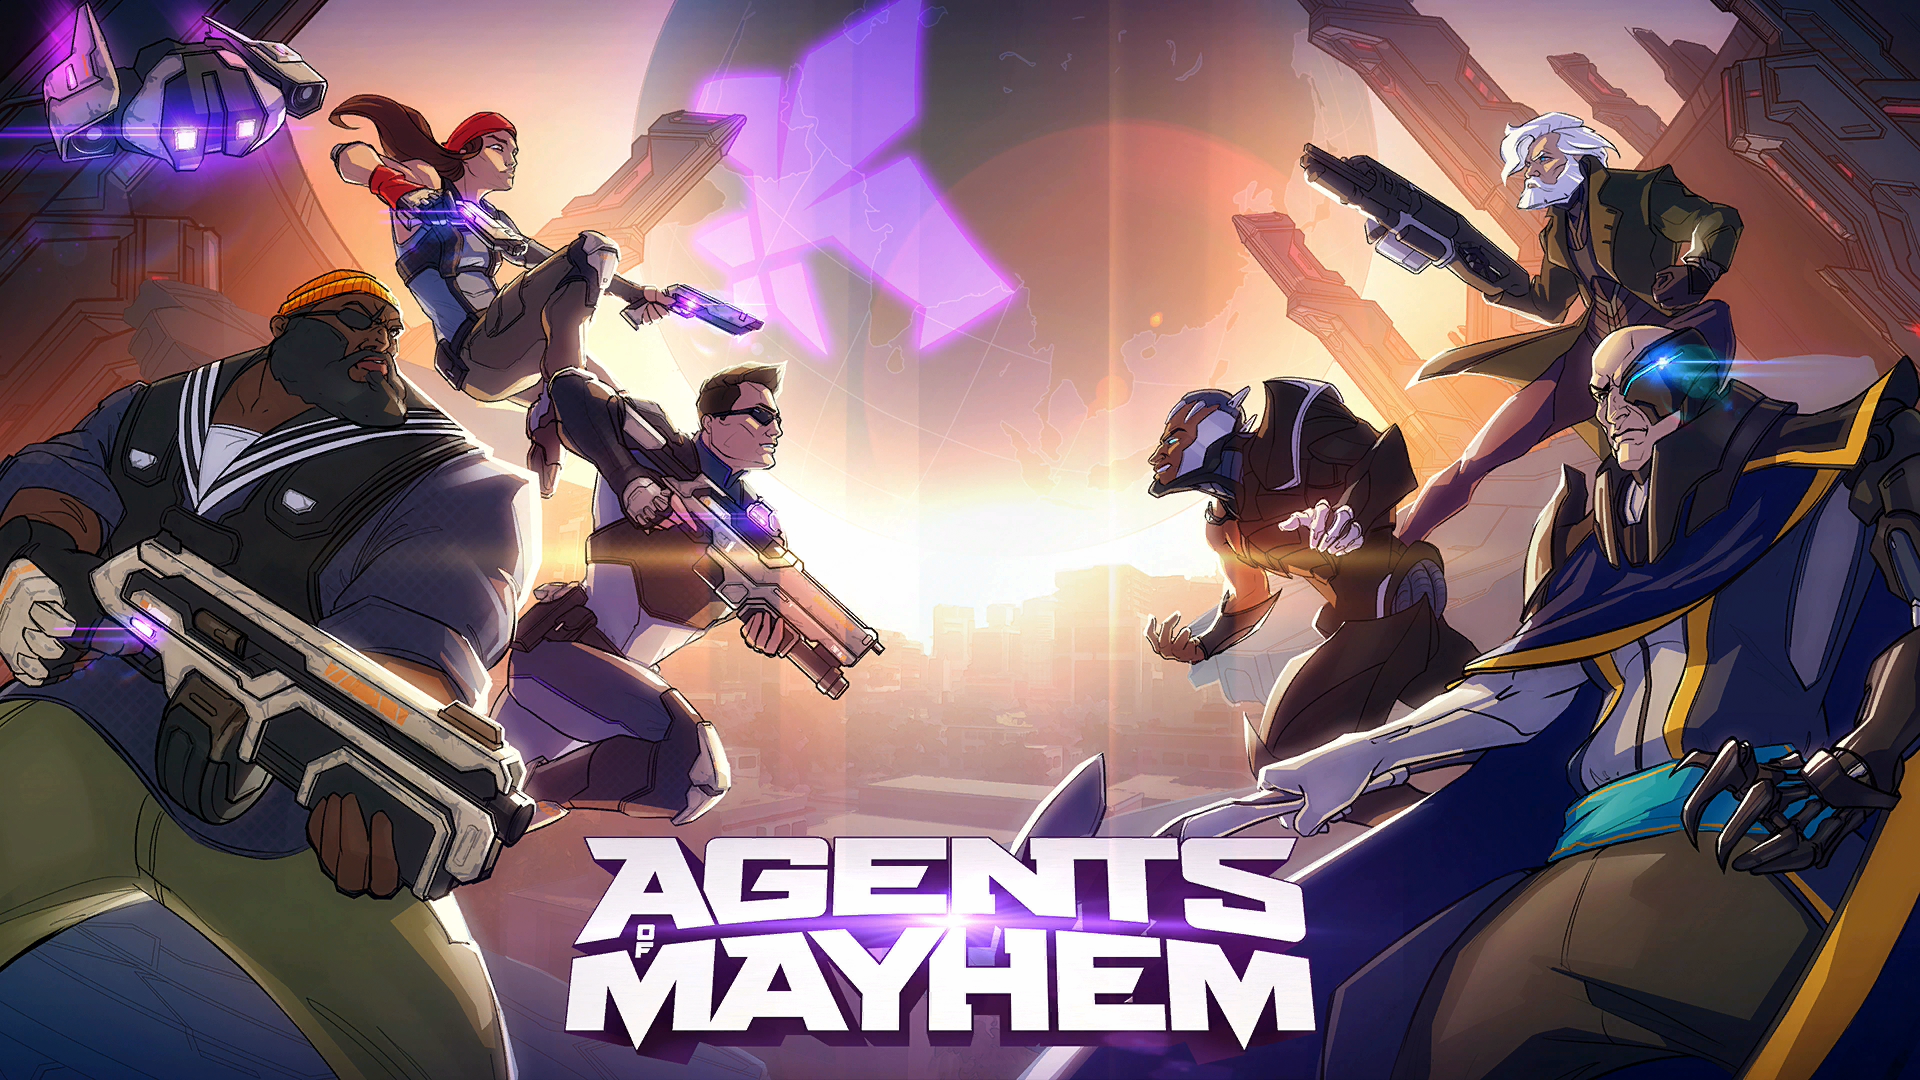 5 Things I Already Love About Agents Of Mayhem